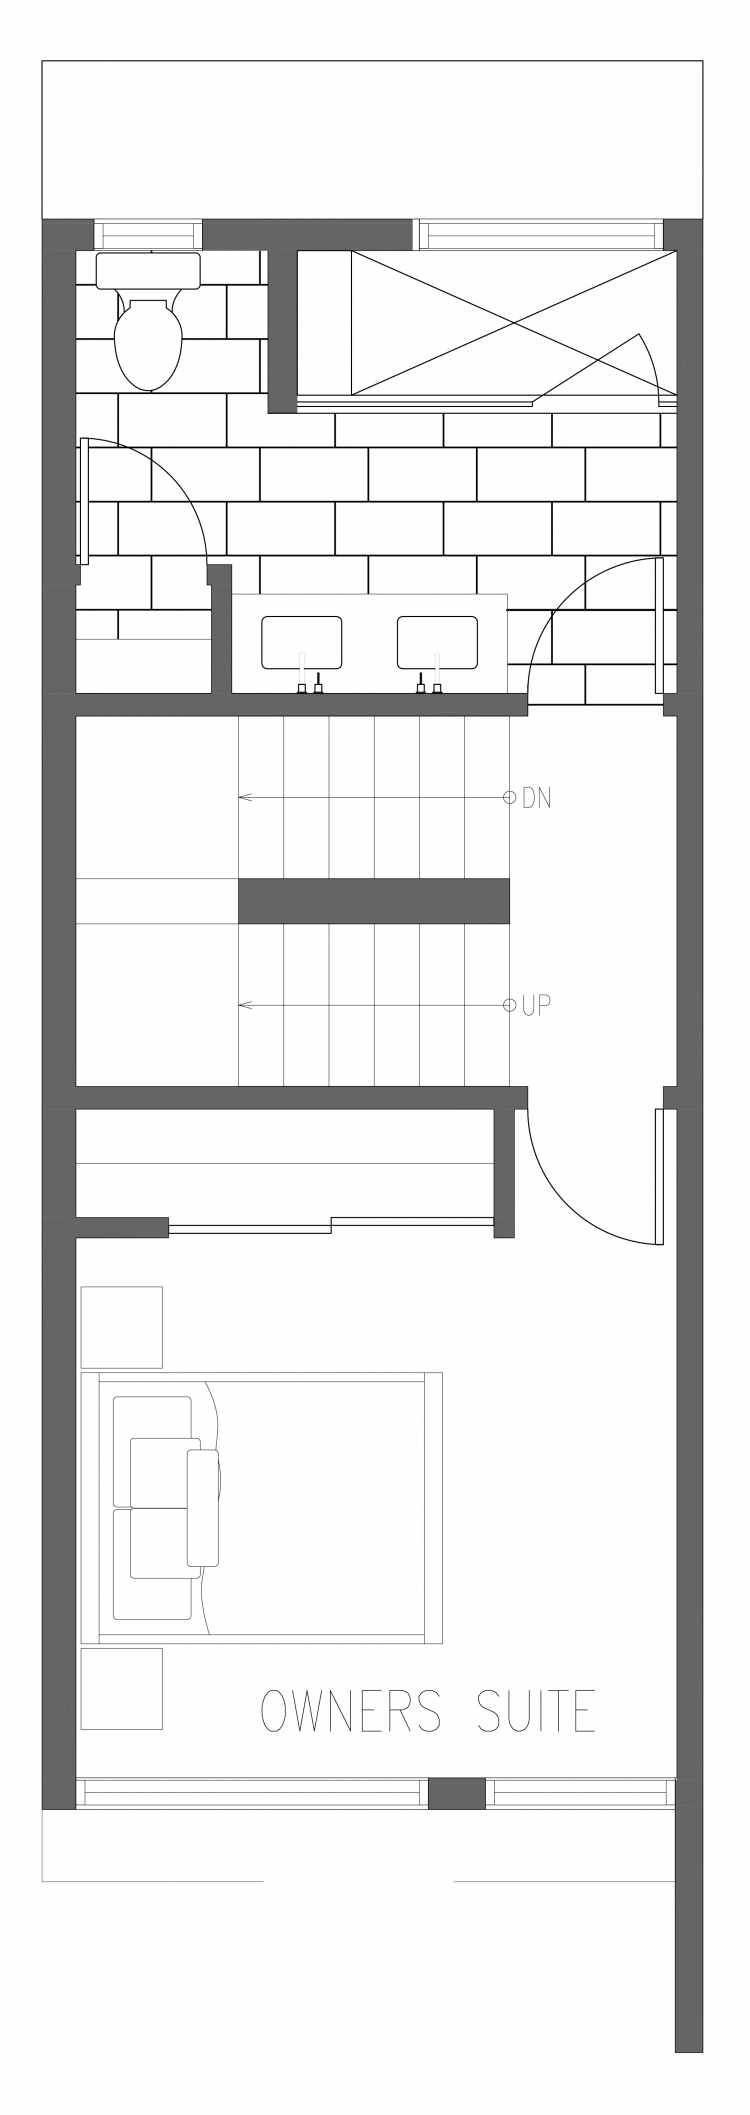 Third Floor Plan of 2361 Beacon Ave S, One of the Brea Townhomes in North Beacon Hill